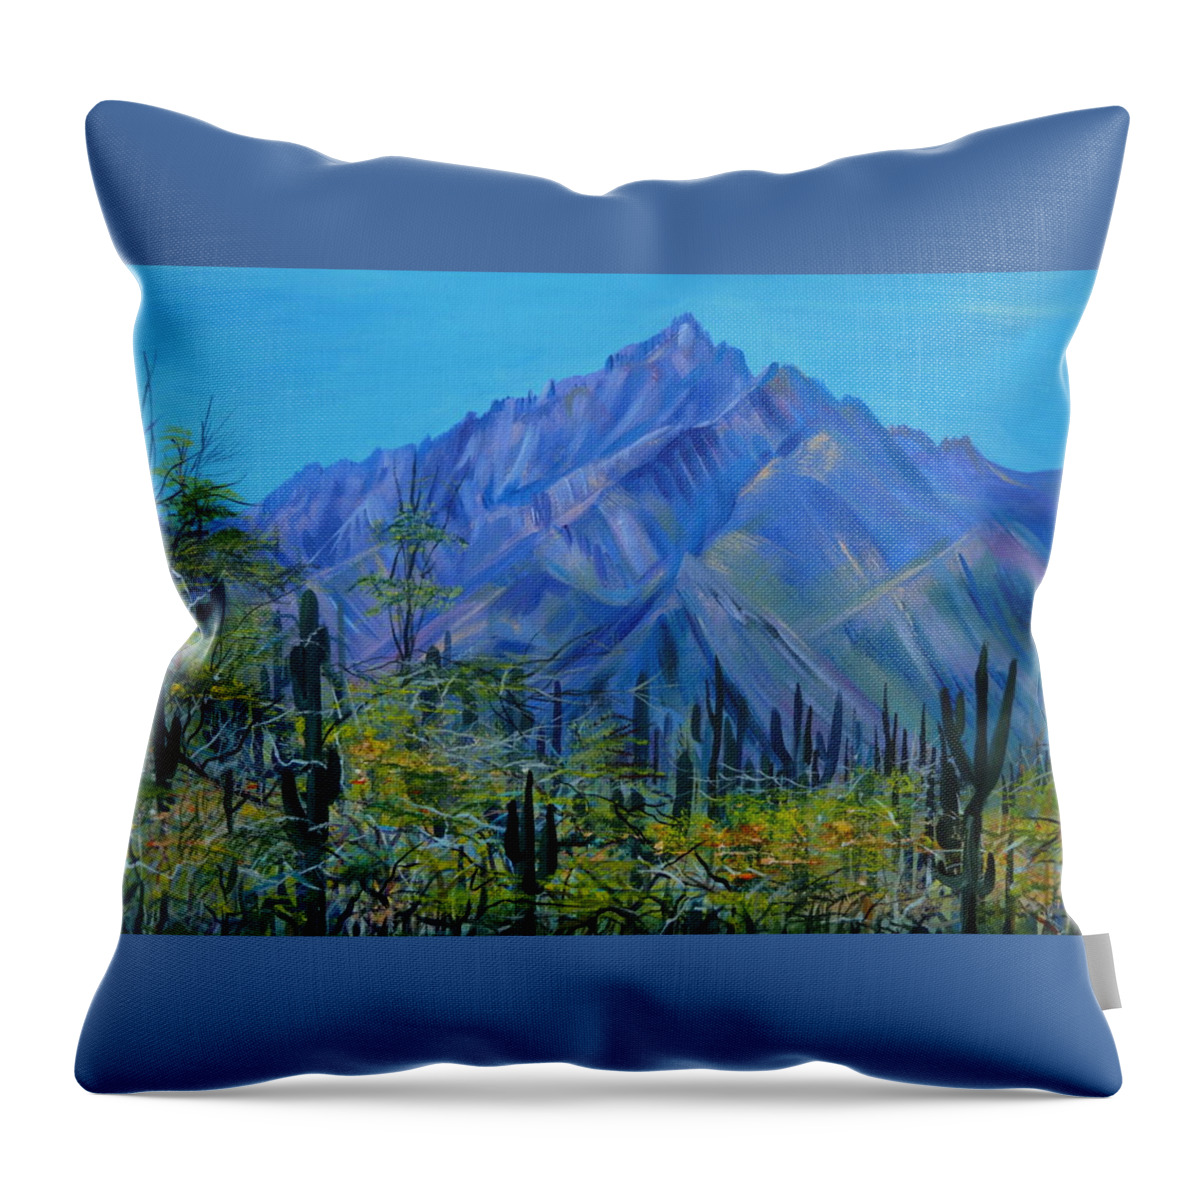 Mexico Throw Pillow featuring the painting Mexico. Countryside by Anna Duyunova